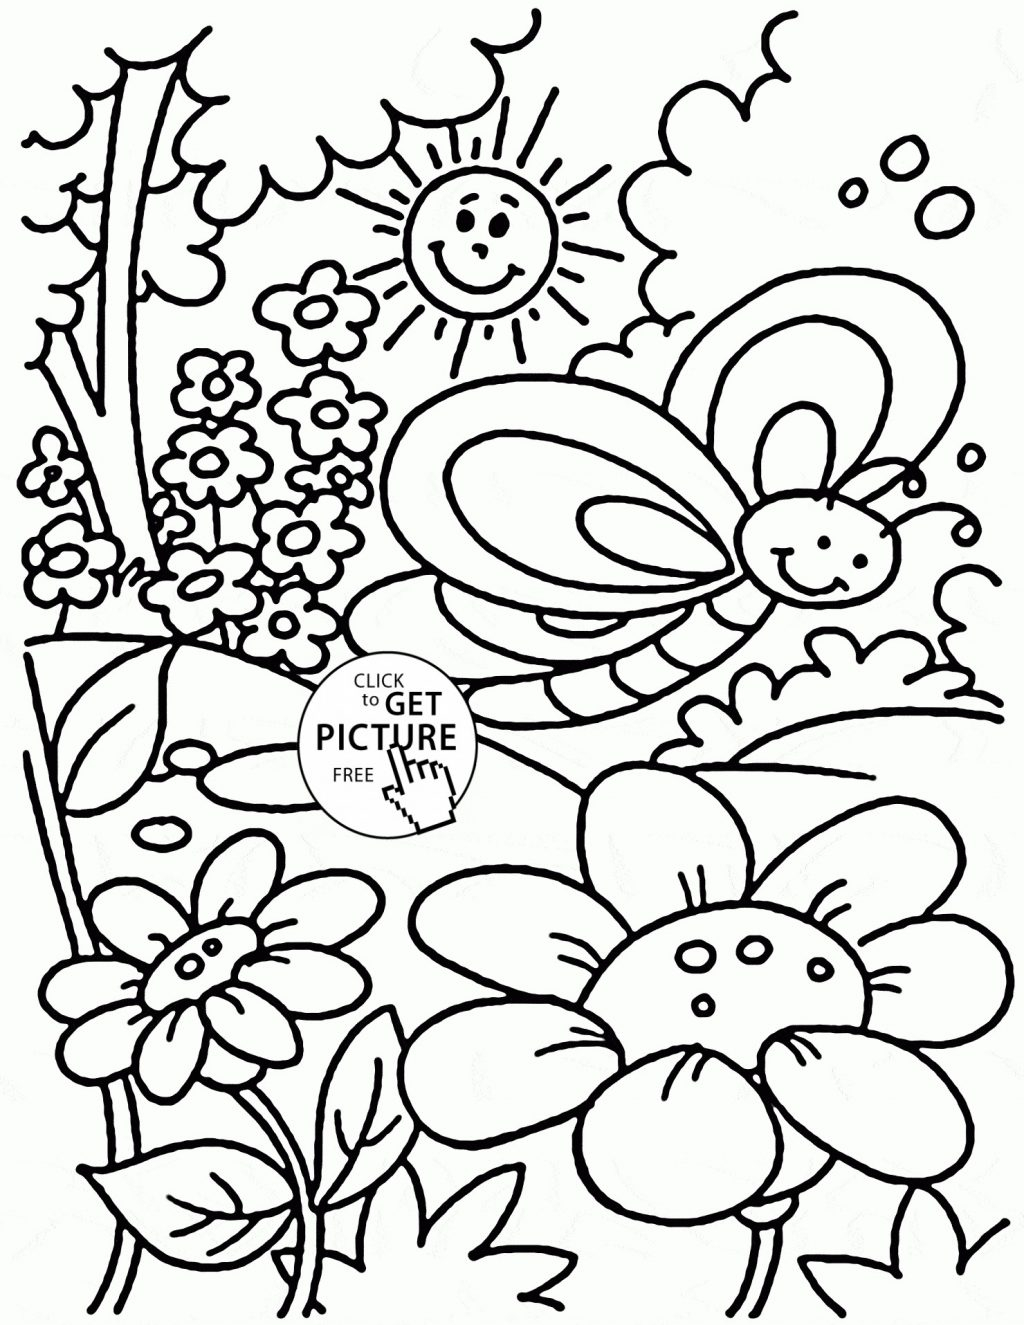 Spring Coloring Pages For Toddlers Coloring Page Spring Coloring Sheets Page Amazing Picture Ideas